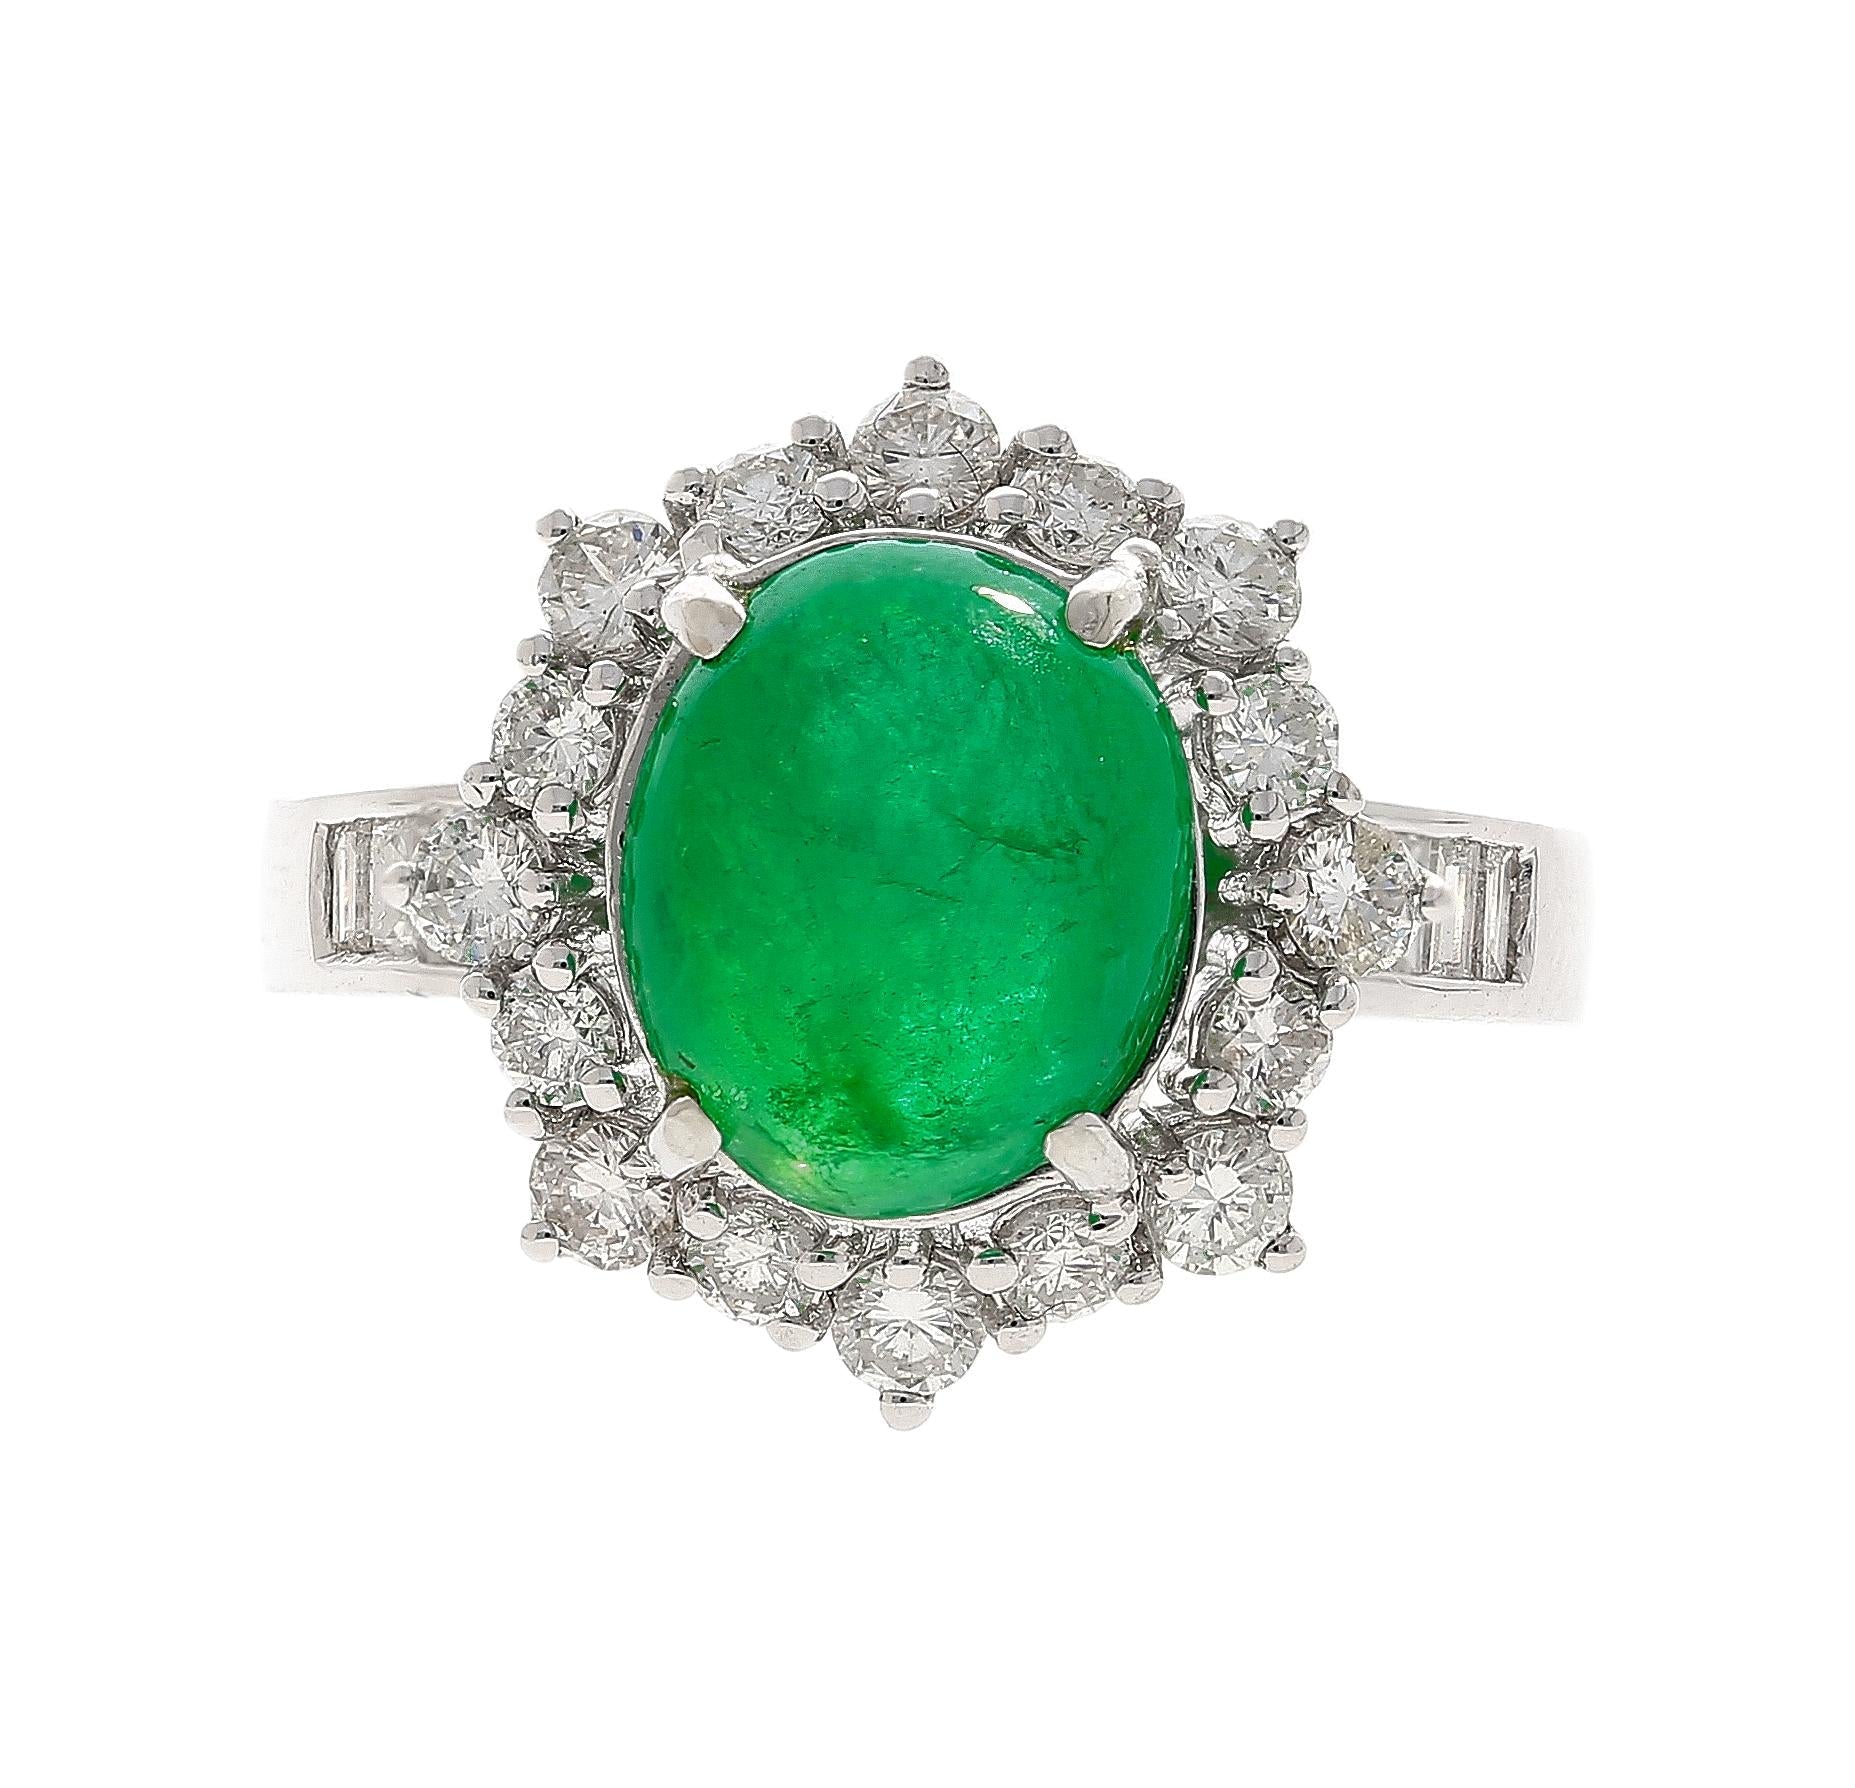 Vintage 3.32 Carat Cabochon Emerald and Diamond Halo Ring in 14K White Gold